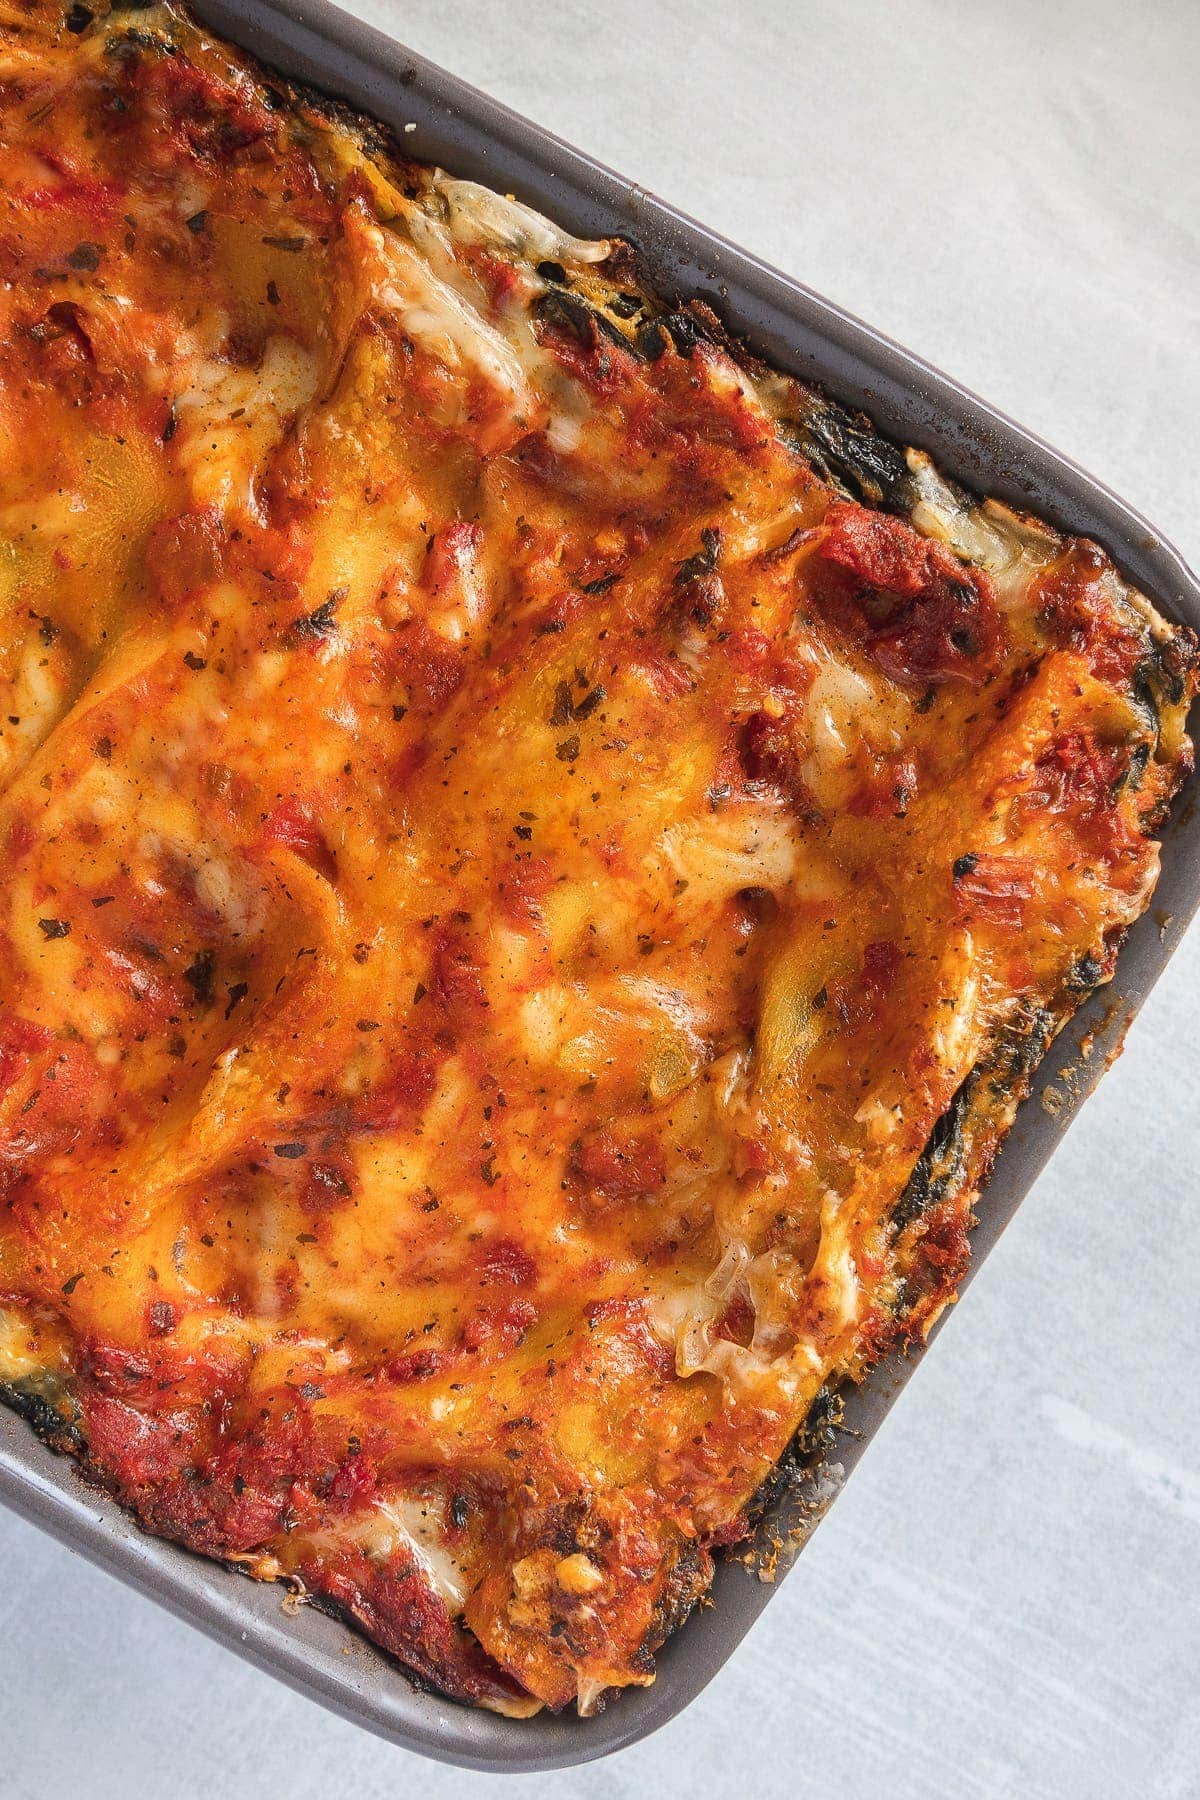 Baked lasagna in a casserole dish